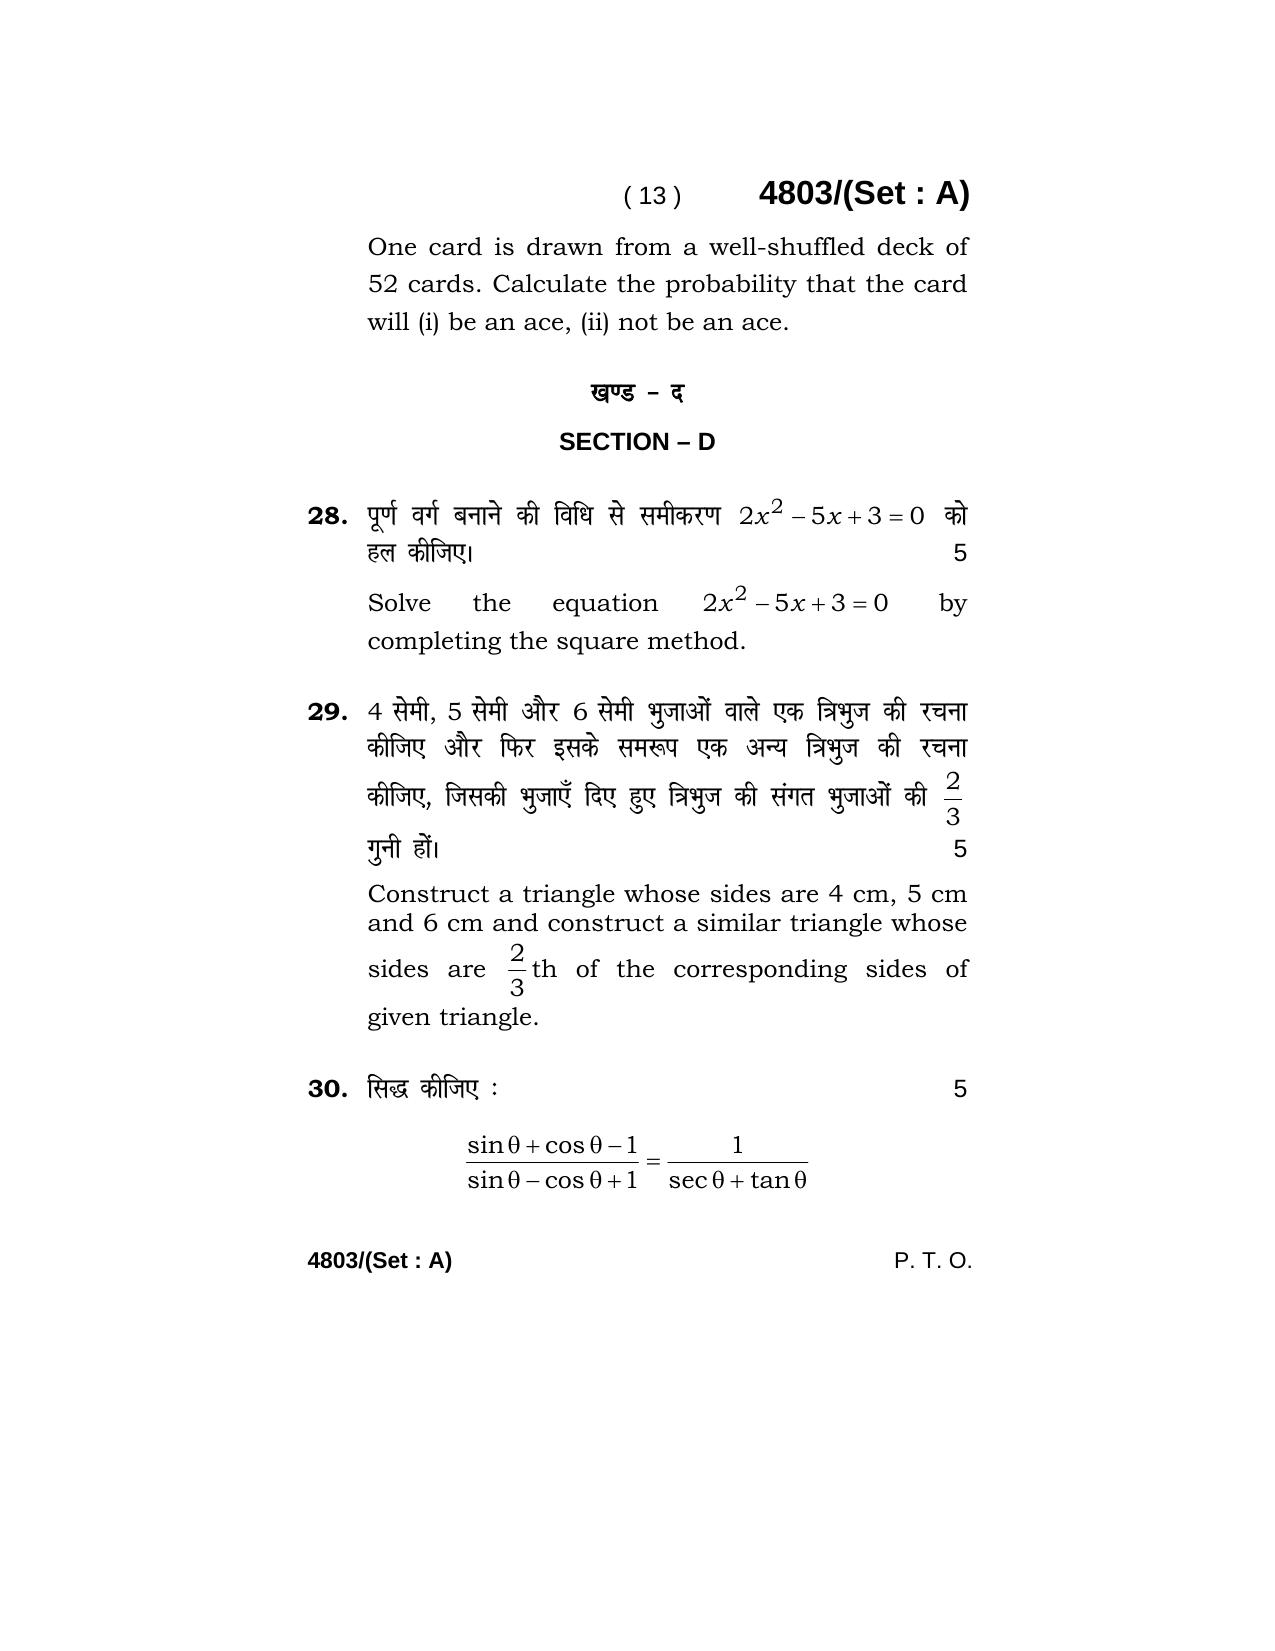 Haryana Board HBSE Class 10 Mathematics 2020 Question Paper - Page 13